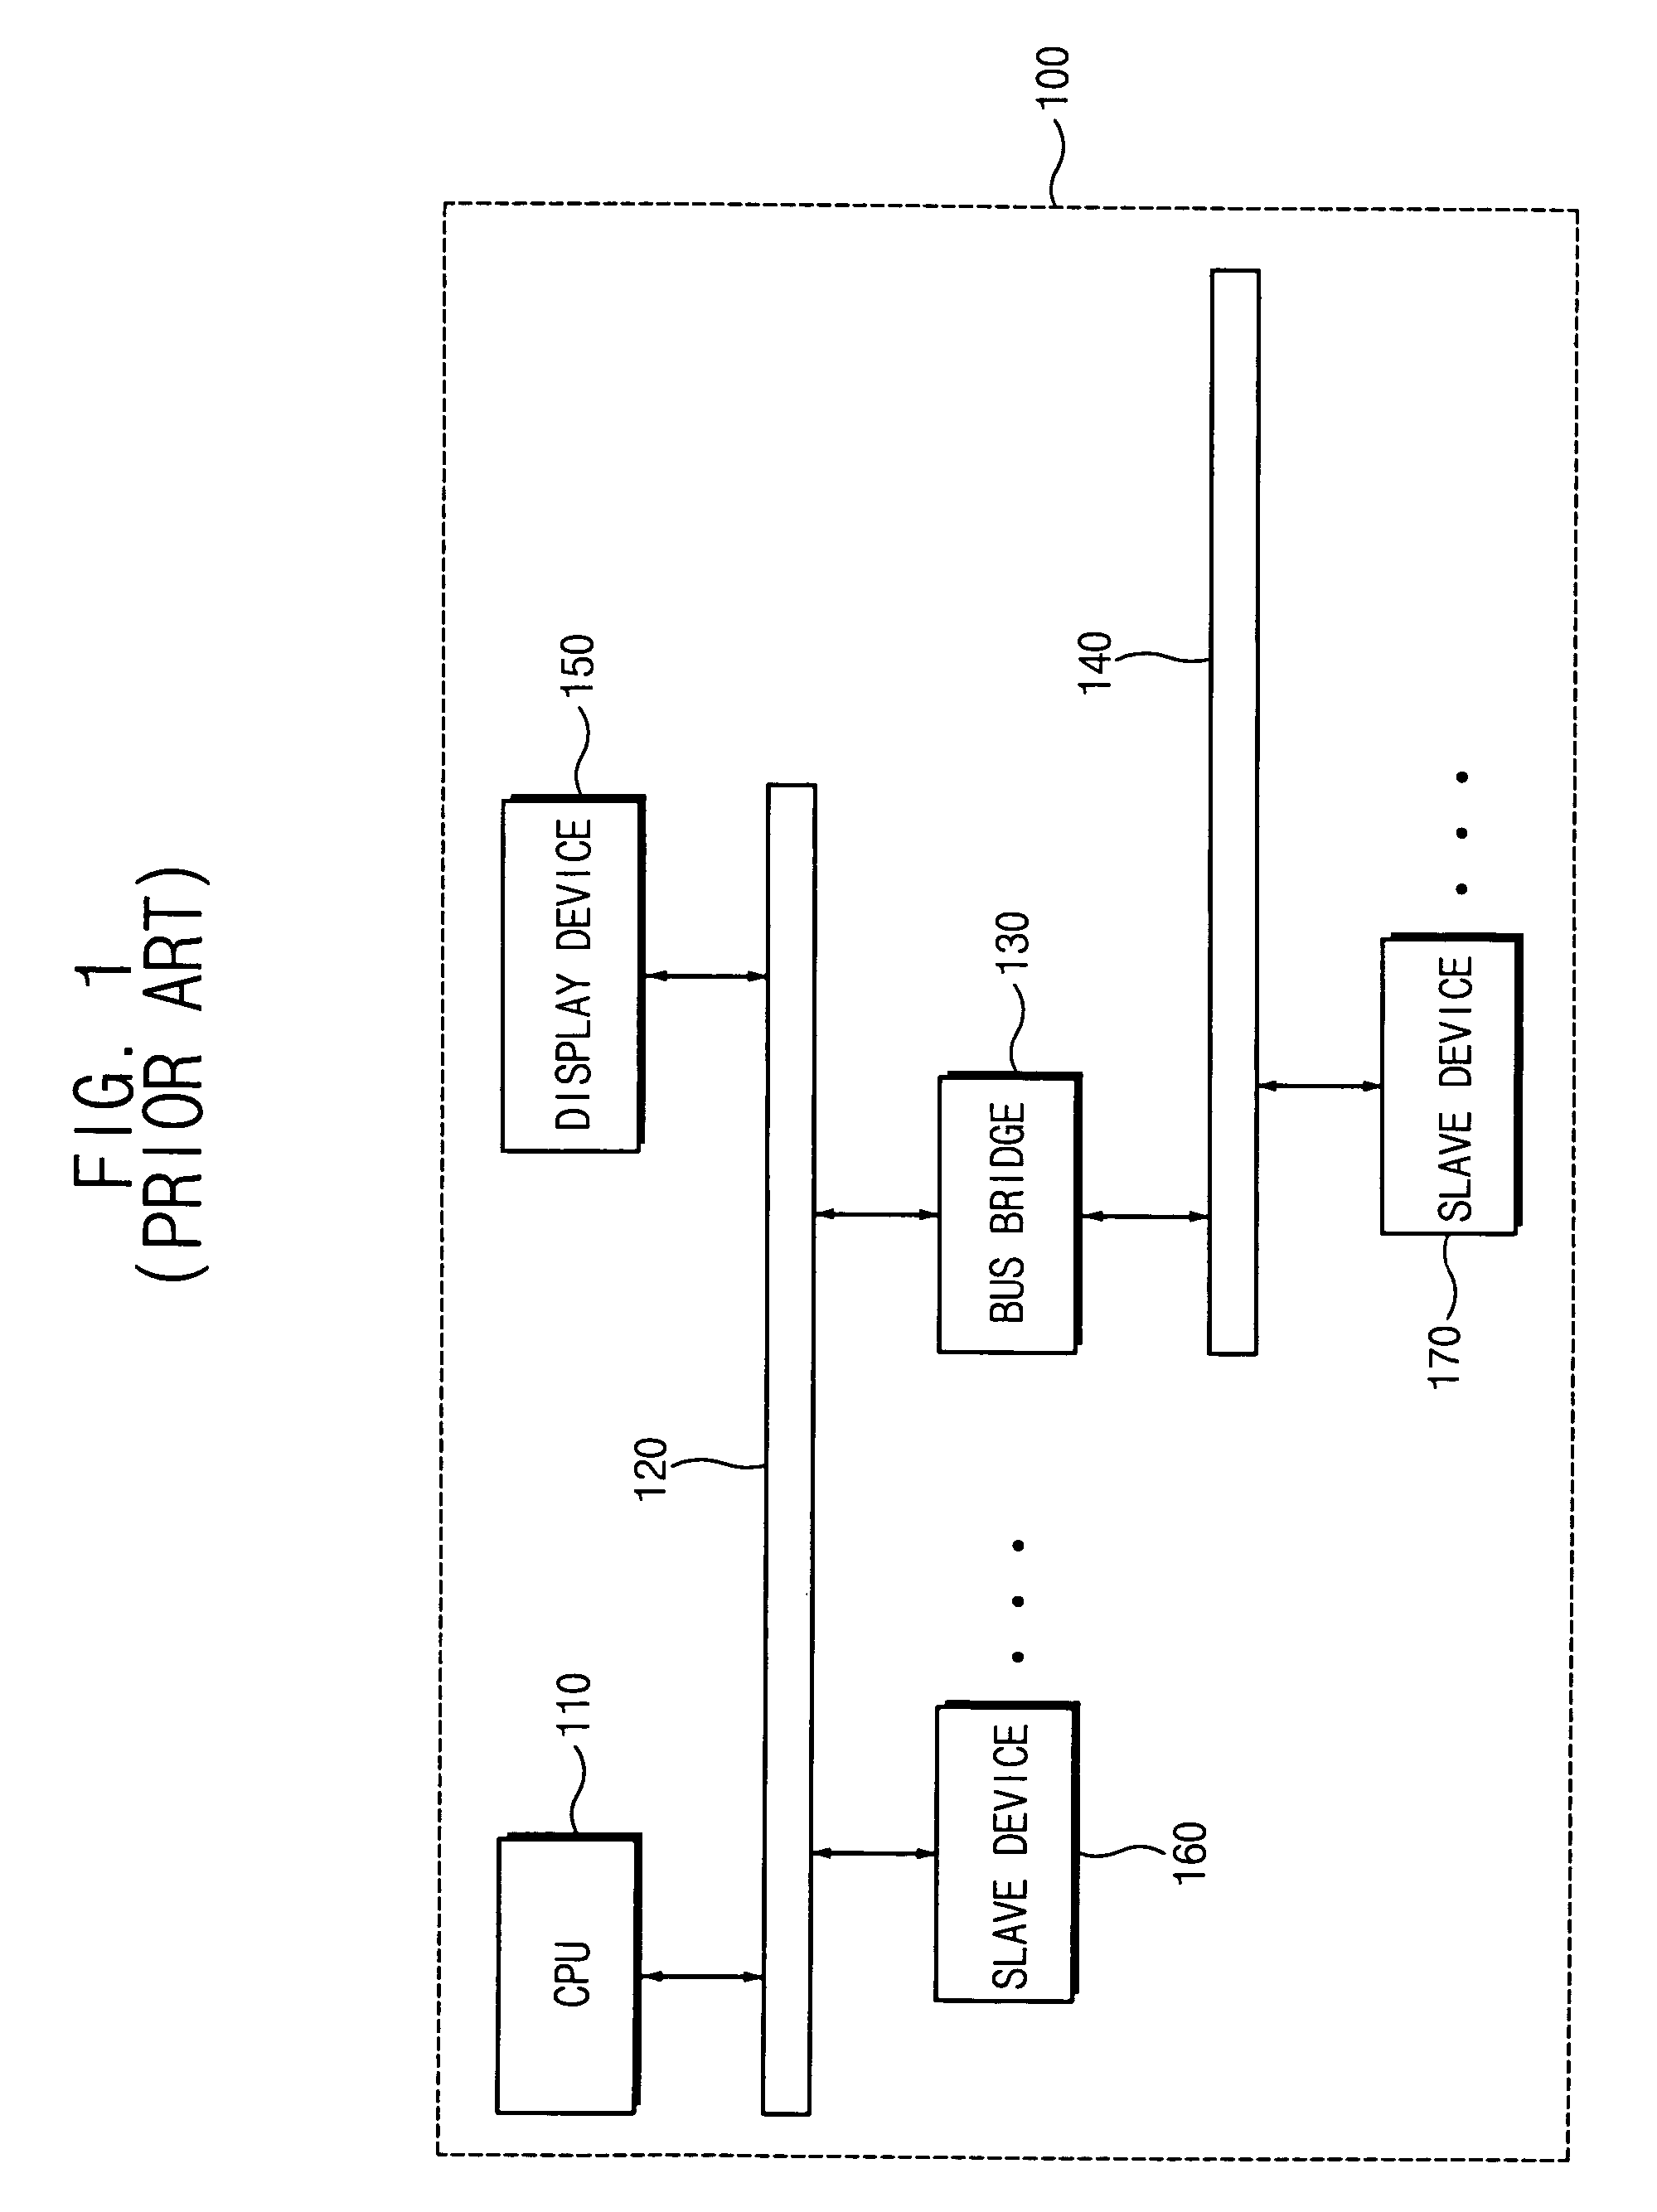 Electronic devices and operational methods that change clock frequencies that are applied to a central processing unit and a main system bus